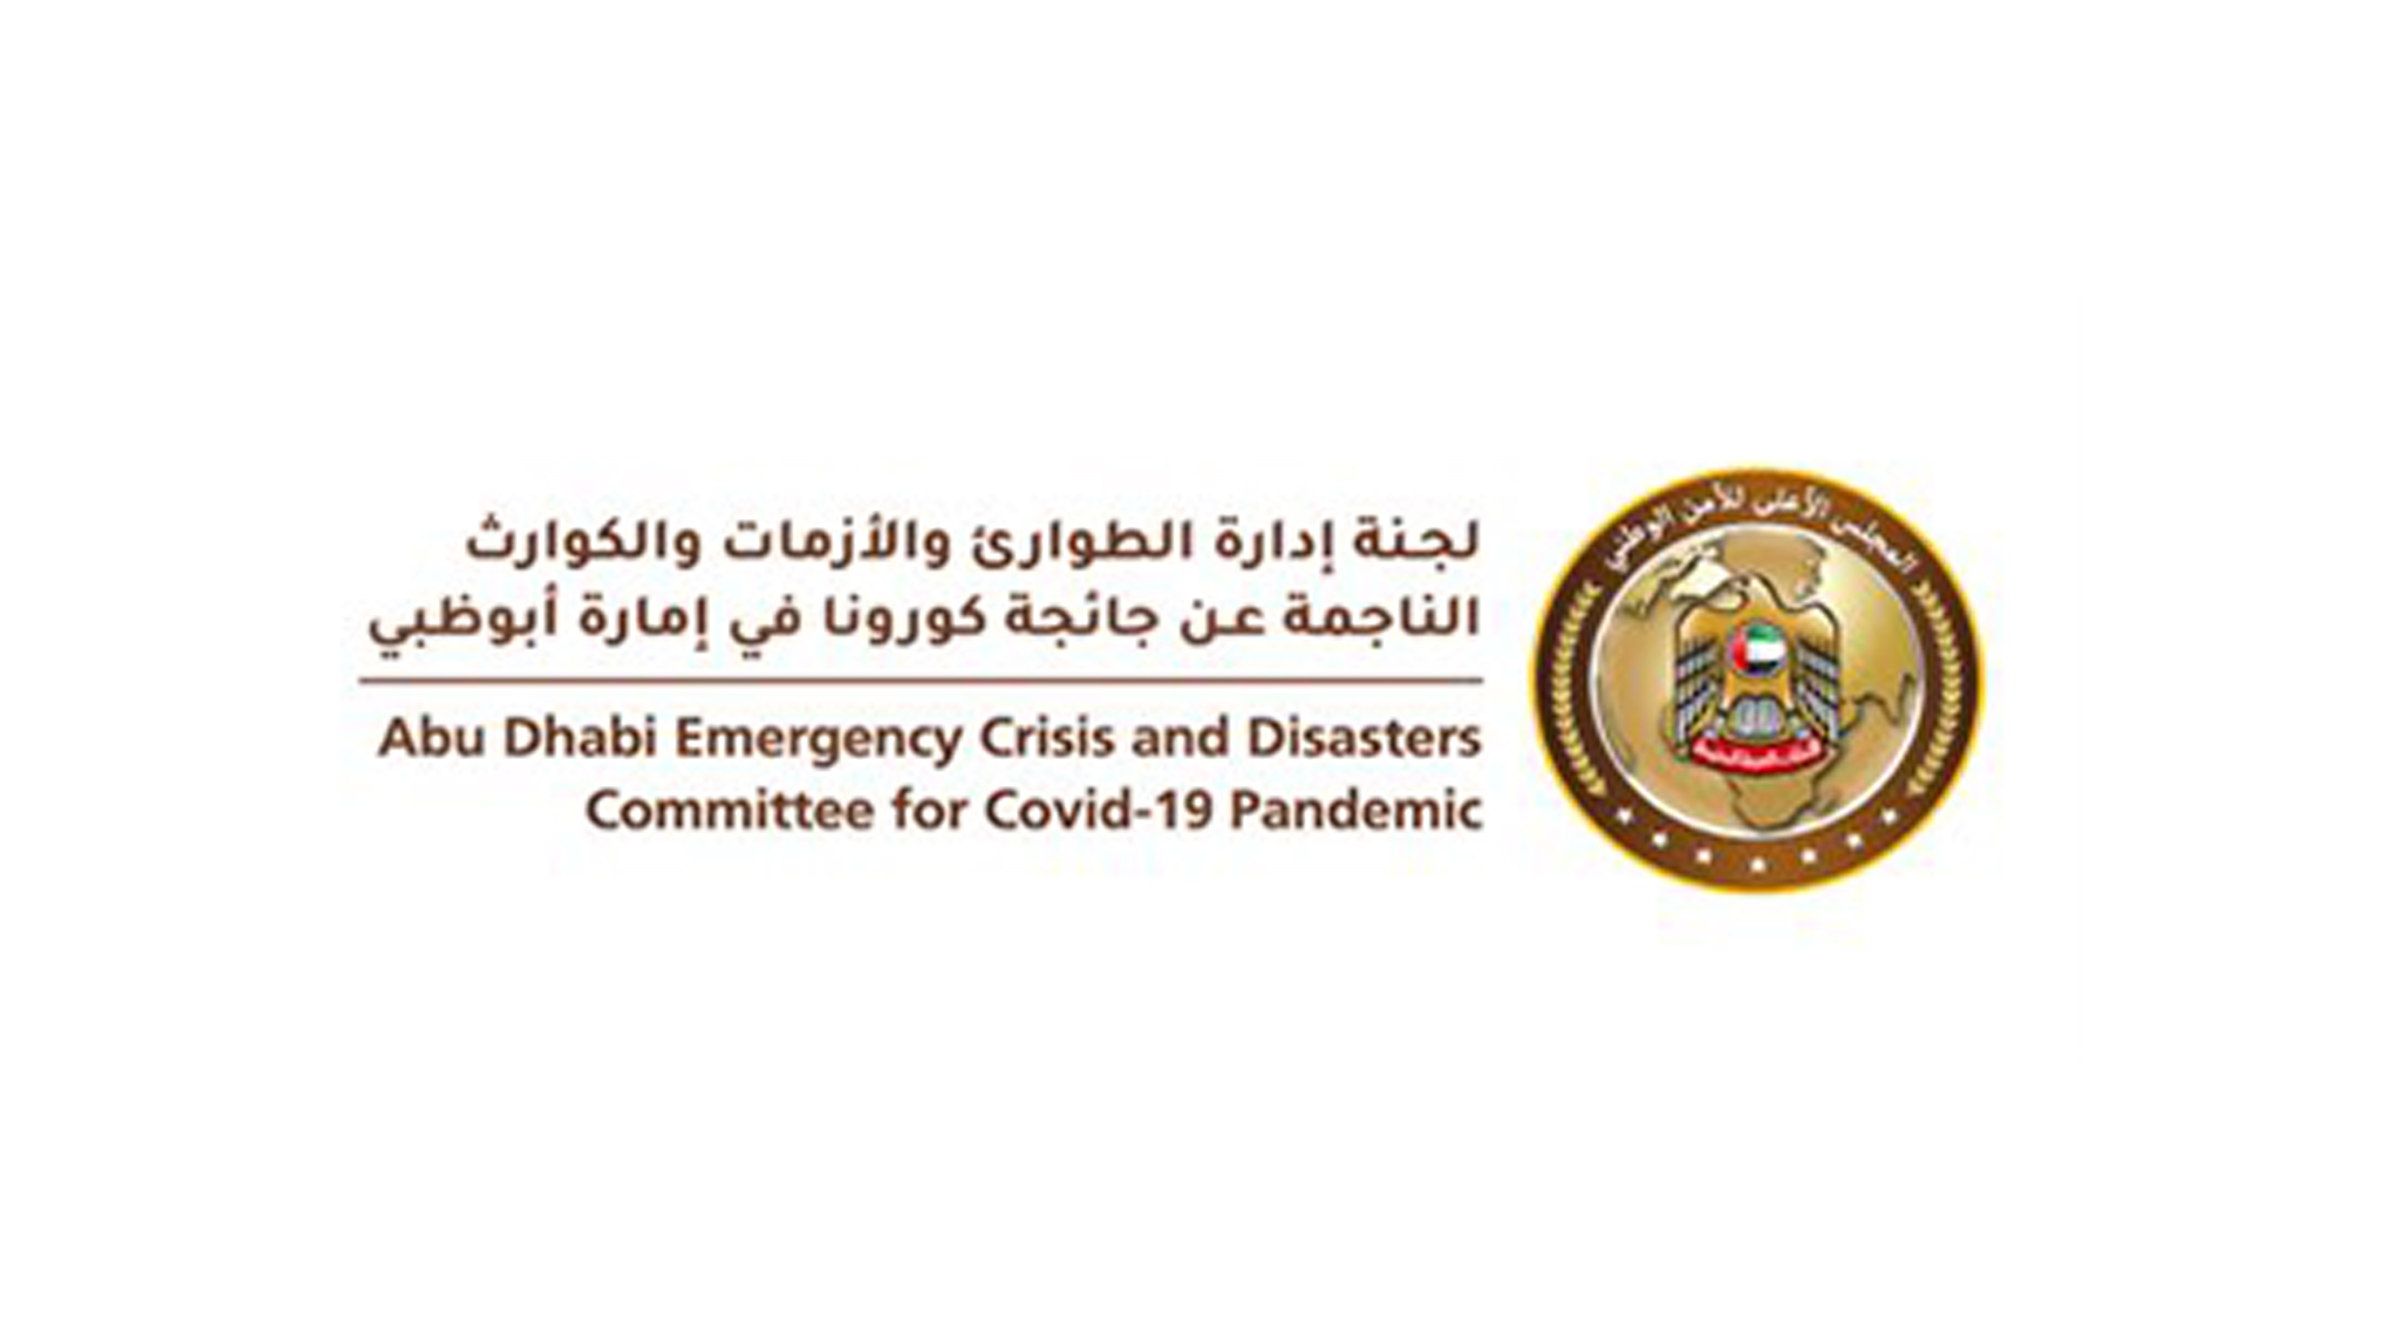 Abu Dhabi Emergency, Crisis and Disasters Committee updates home quarantine guidelines for those in contact with COVID-19 positive cases